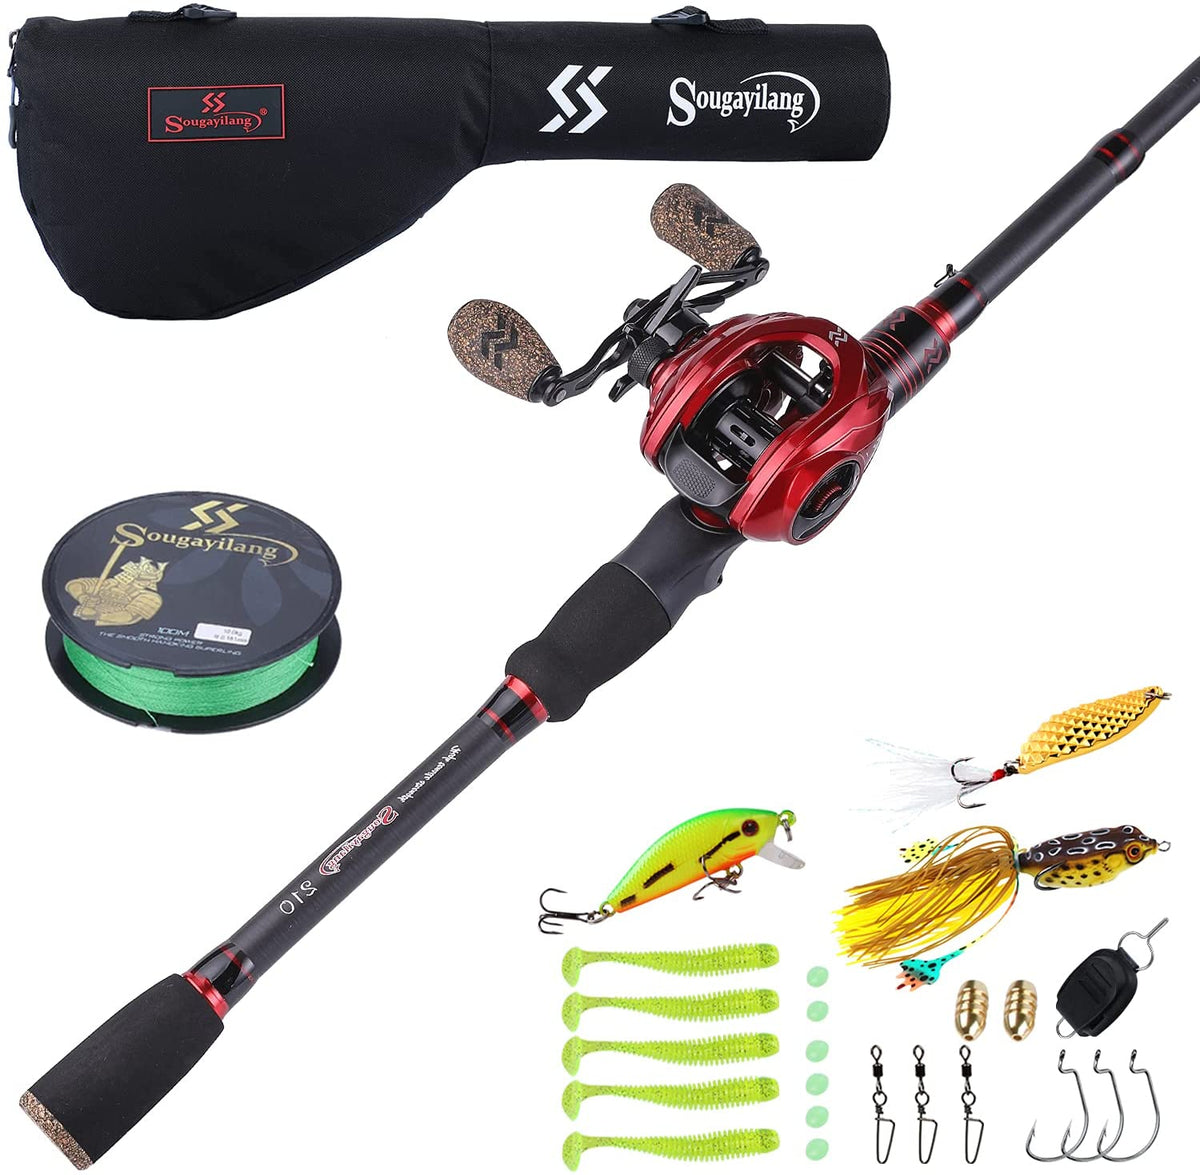 Sougayilang Baitcaster Combos Fishing Full Kit with Portable 5 Section  Fishing Rod and 19BB Baitcasting Reel and Fishing Carrire Bag Accosseries